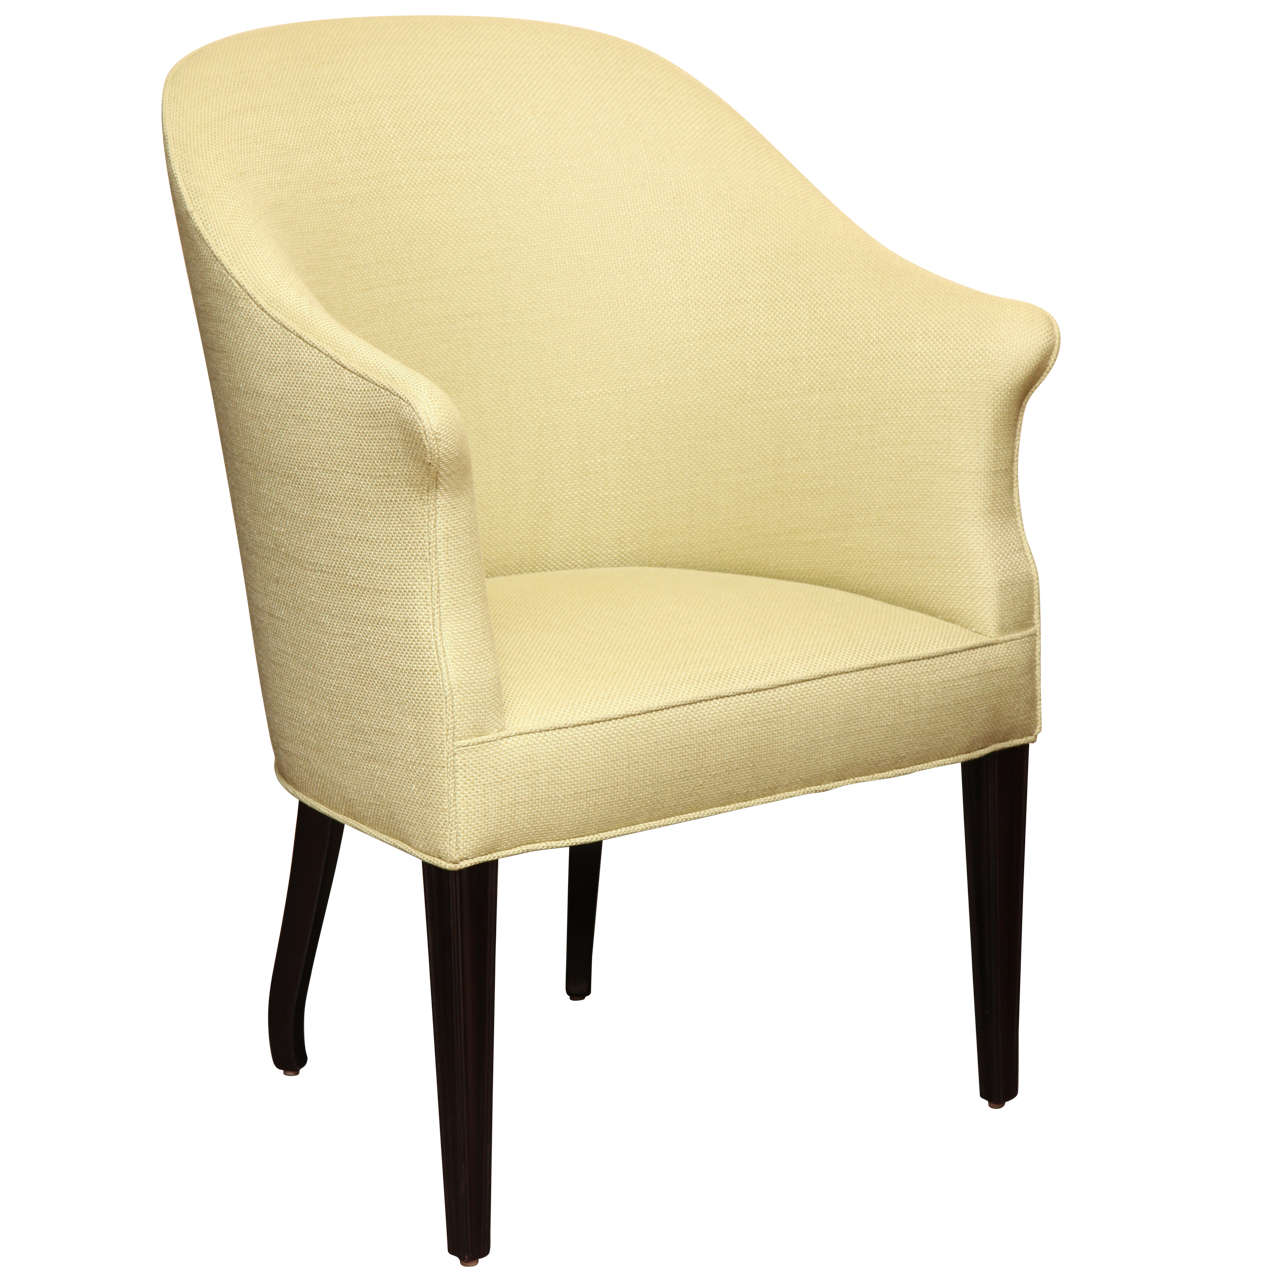 The Thomas Chair by Duane Modern For Sale